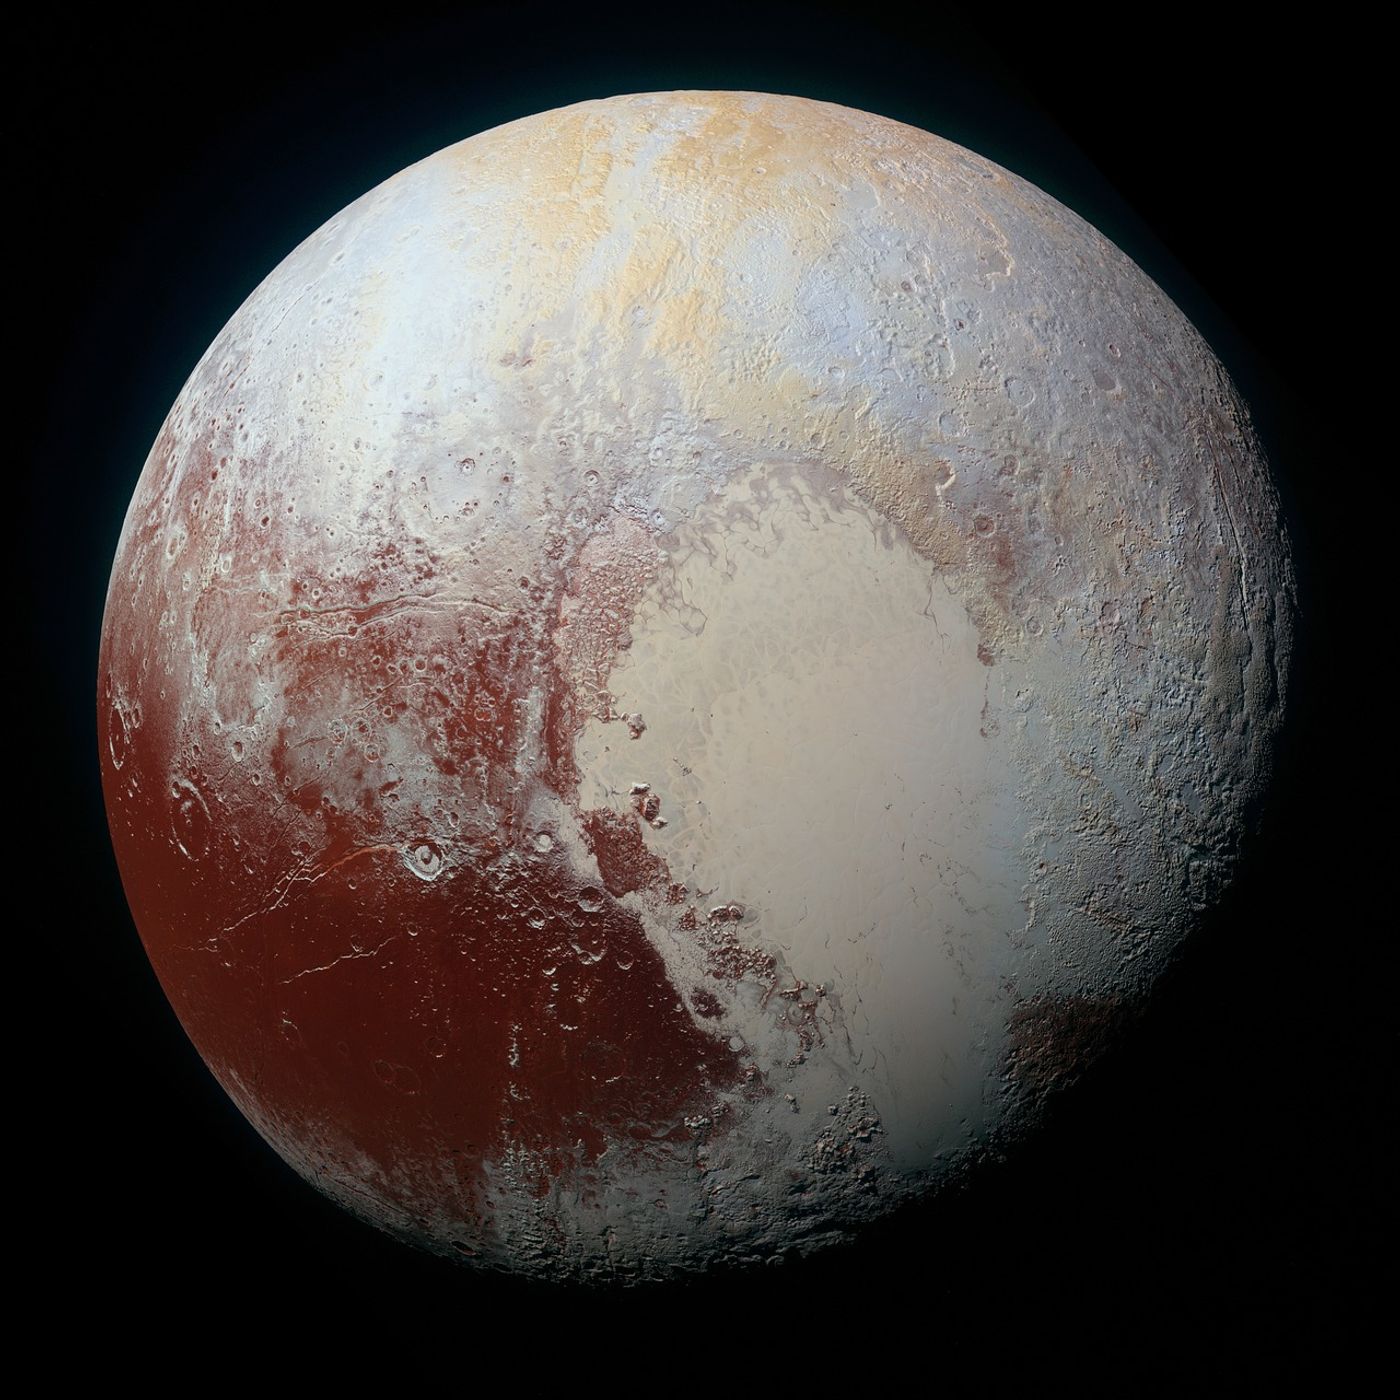 An image of Pluto, captured by NASA's New Horizons spacecraft during the 2015 fly-by mission.